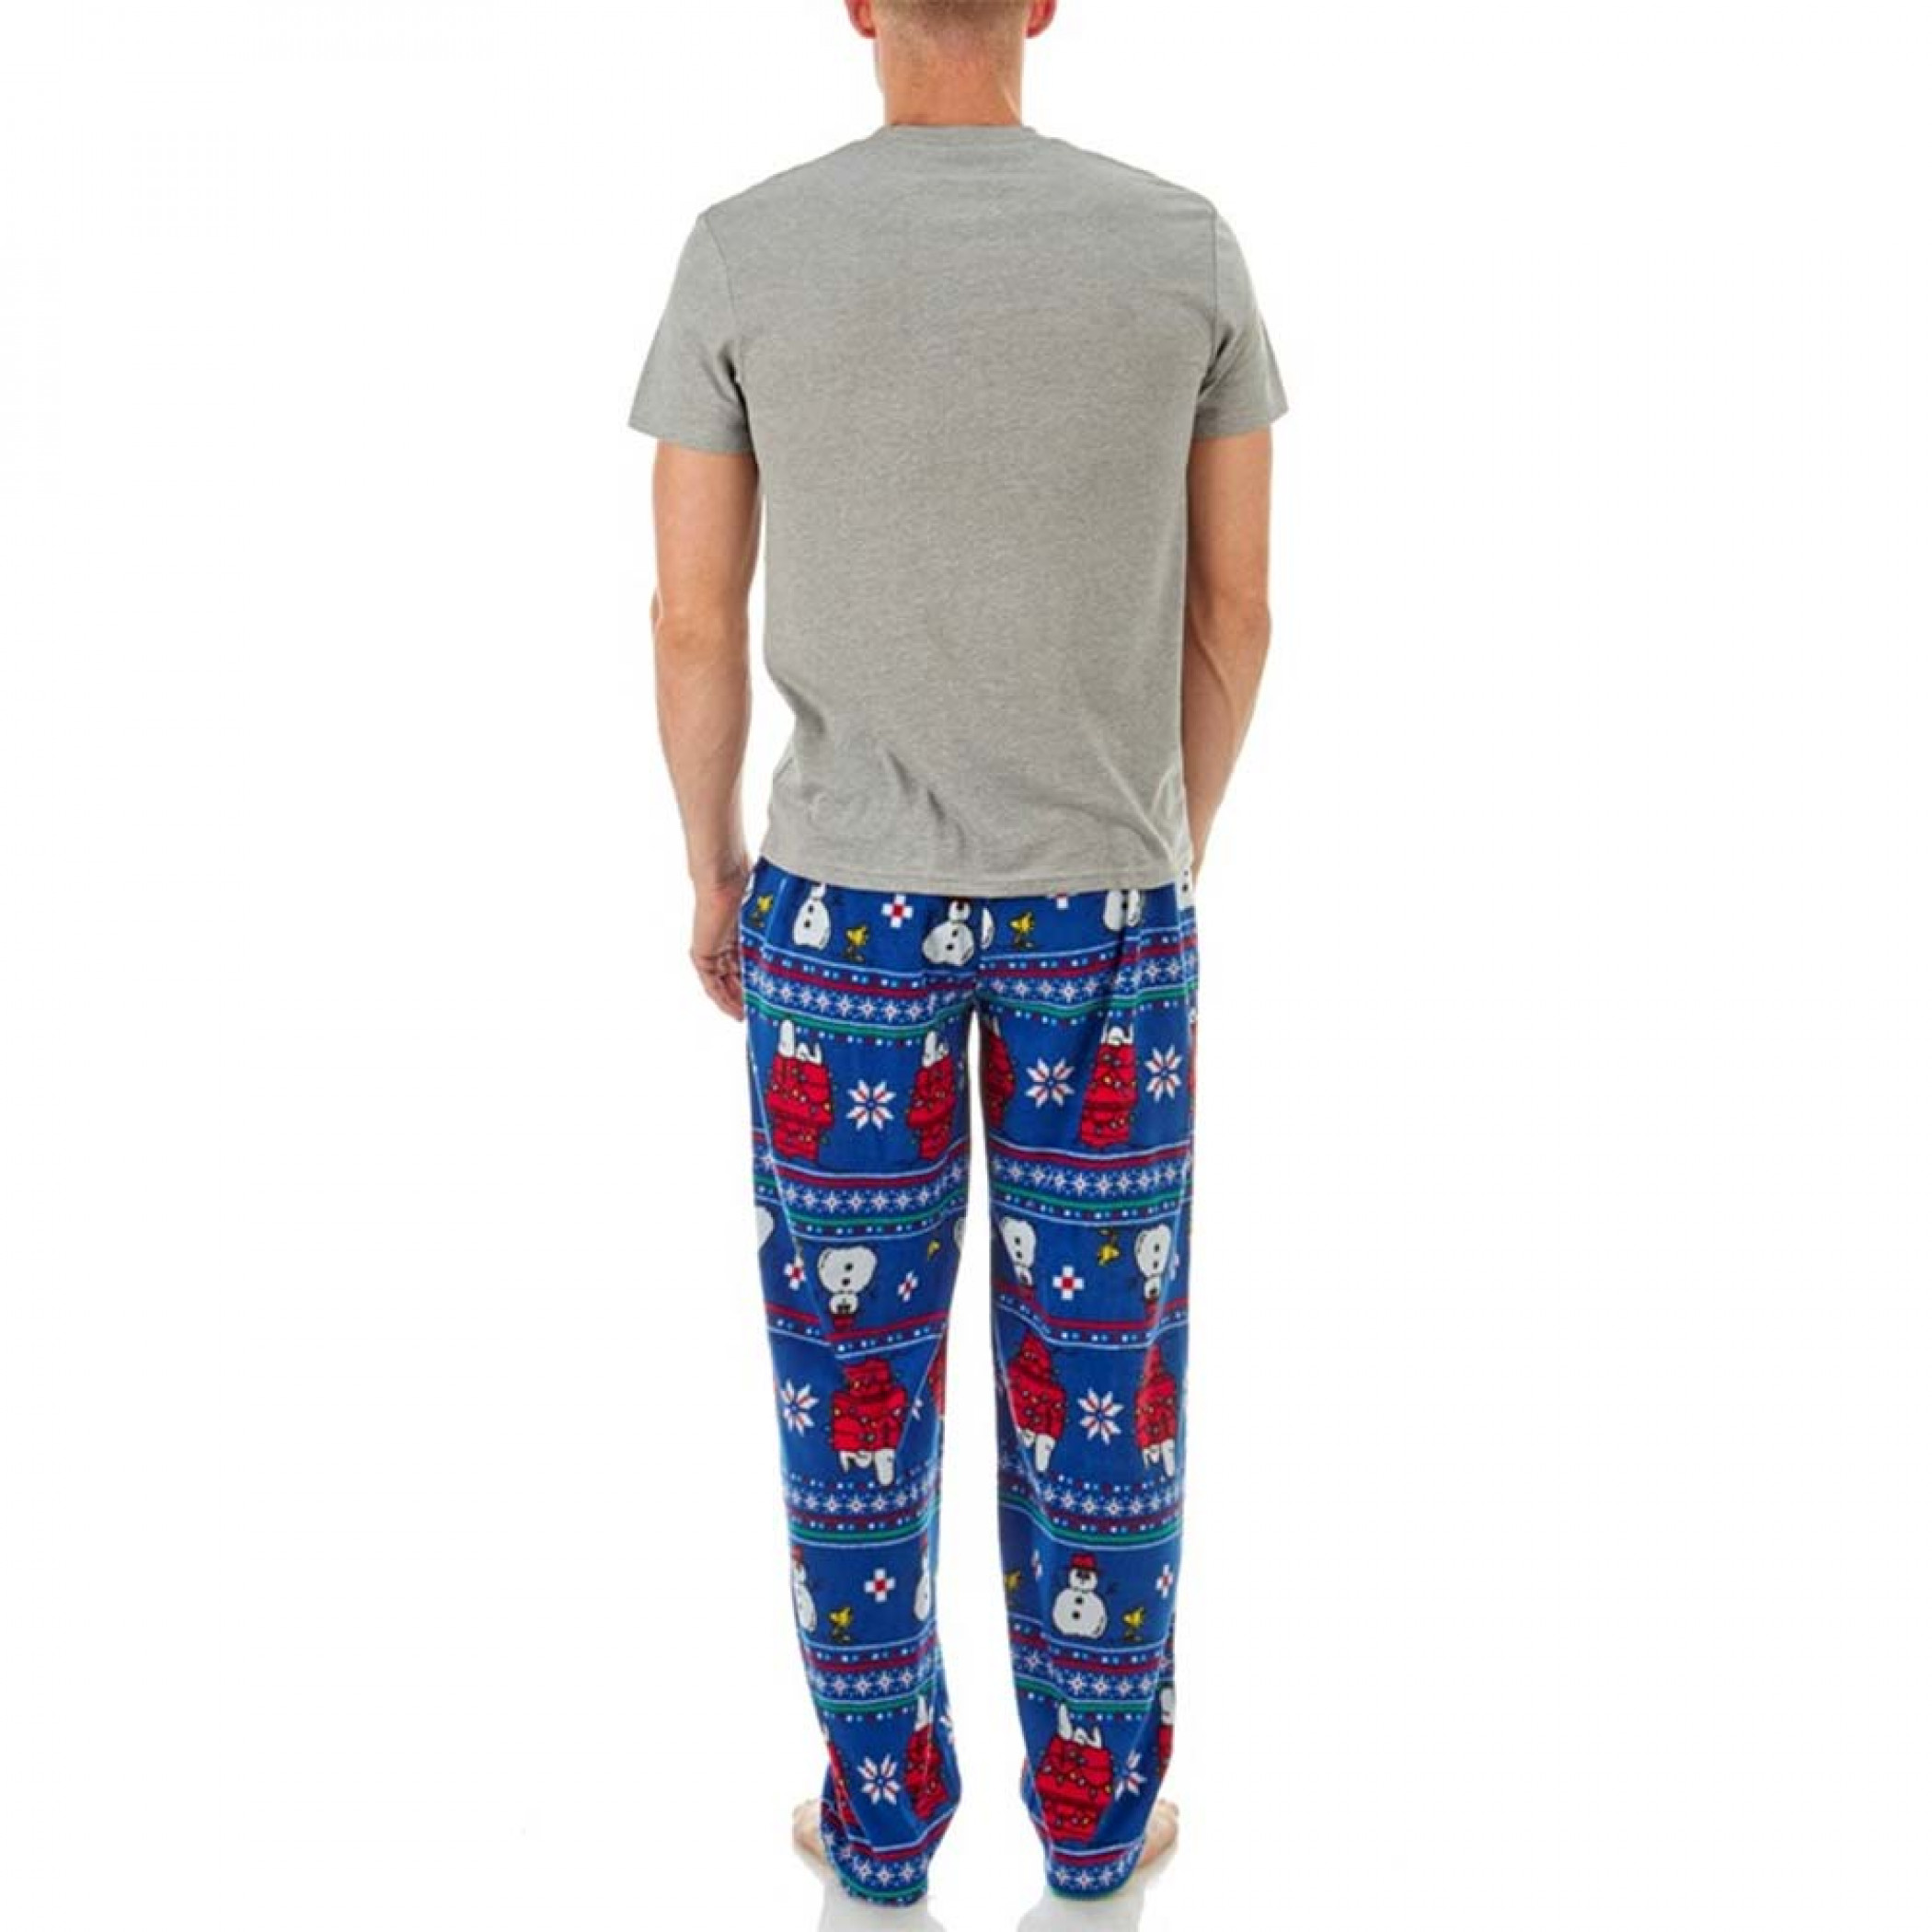 Snoopy Grey And Blue Tee Shirt And Lounge Pant Set